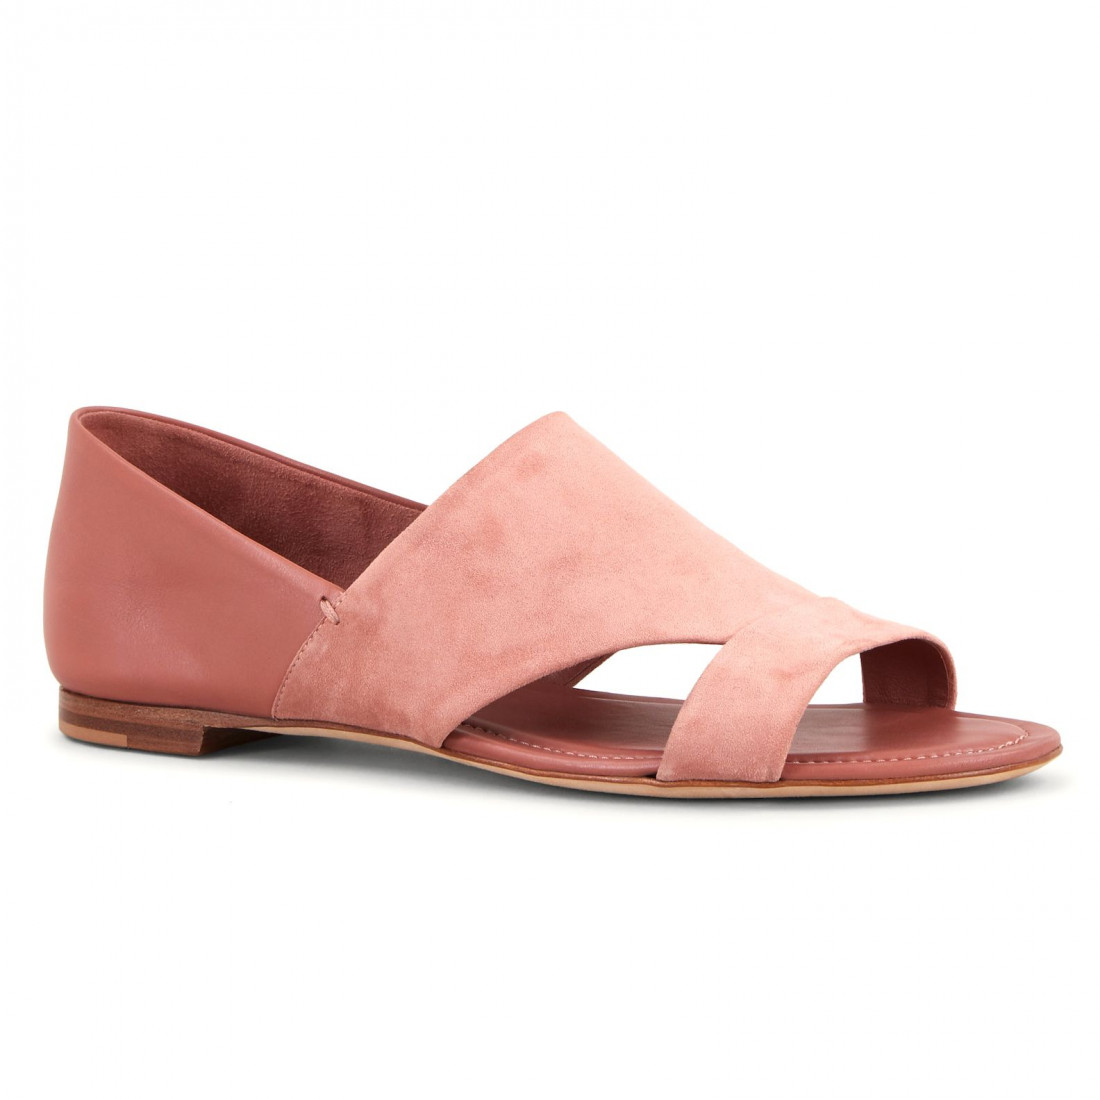 Women's Tod's Sandals in pink leather and suede